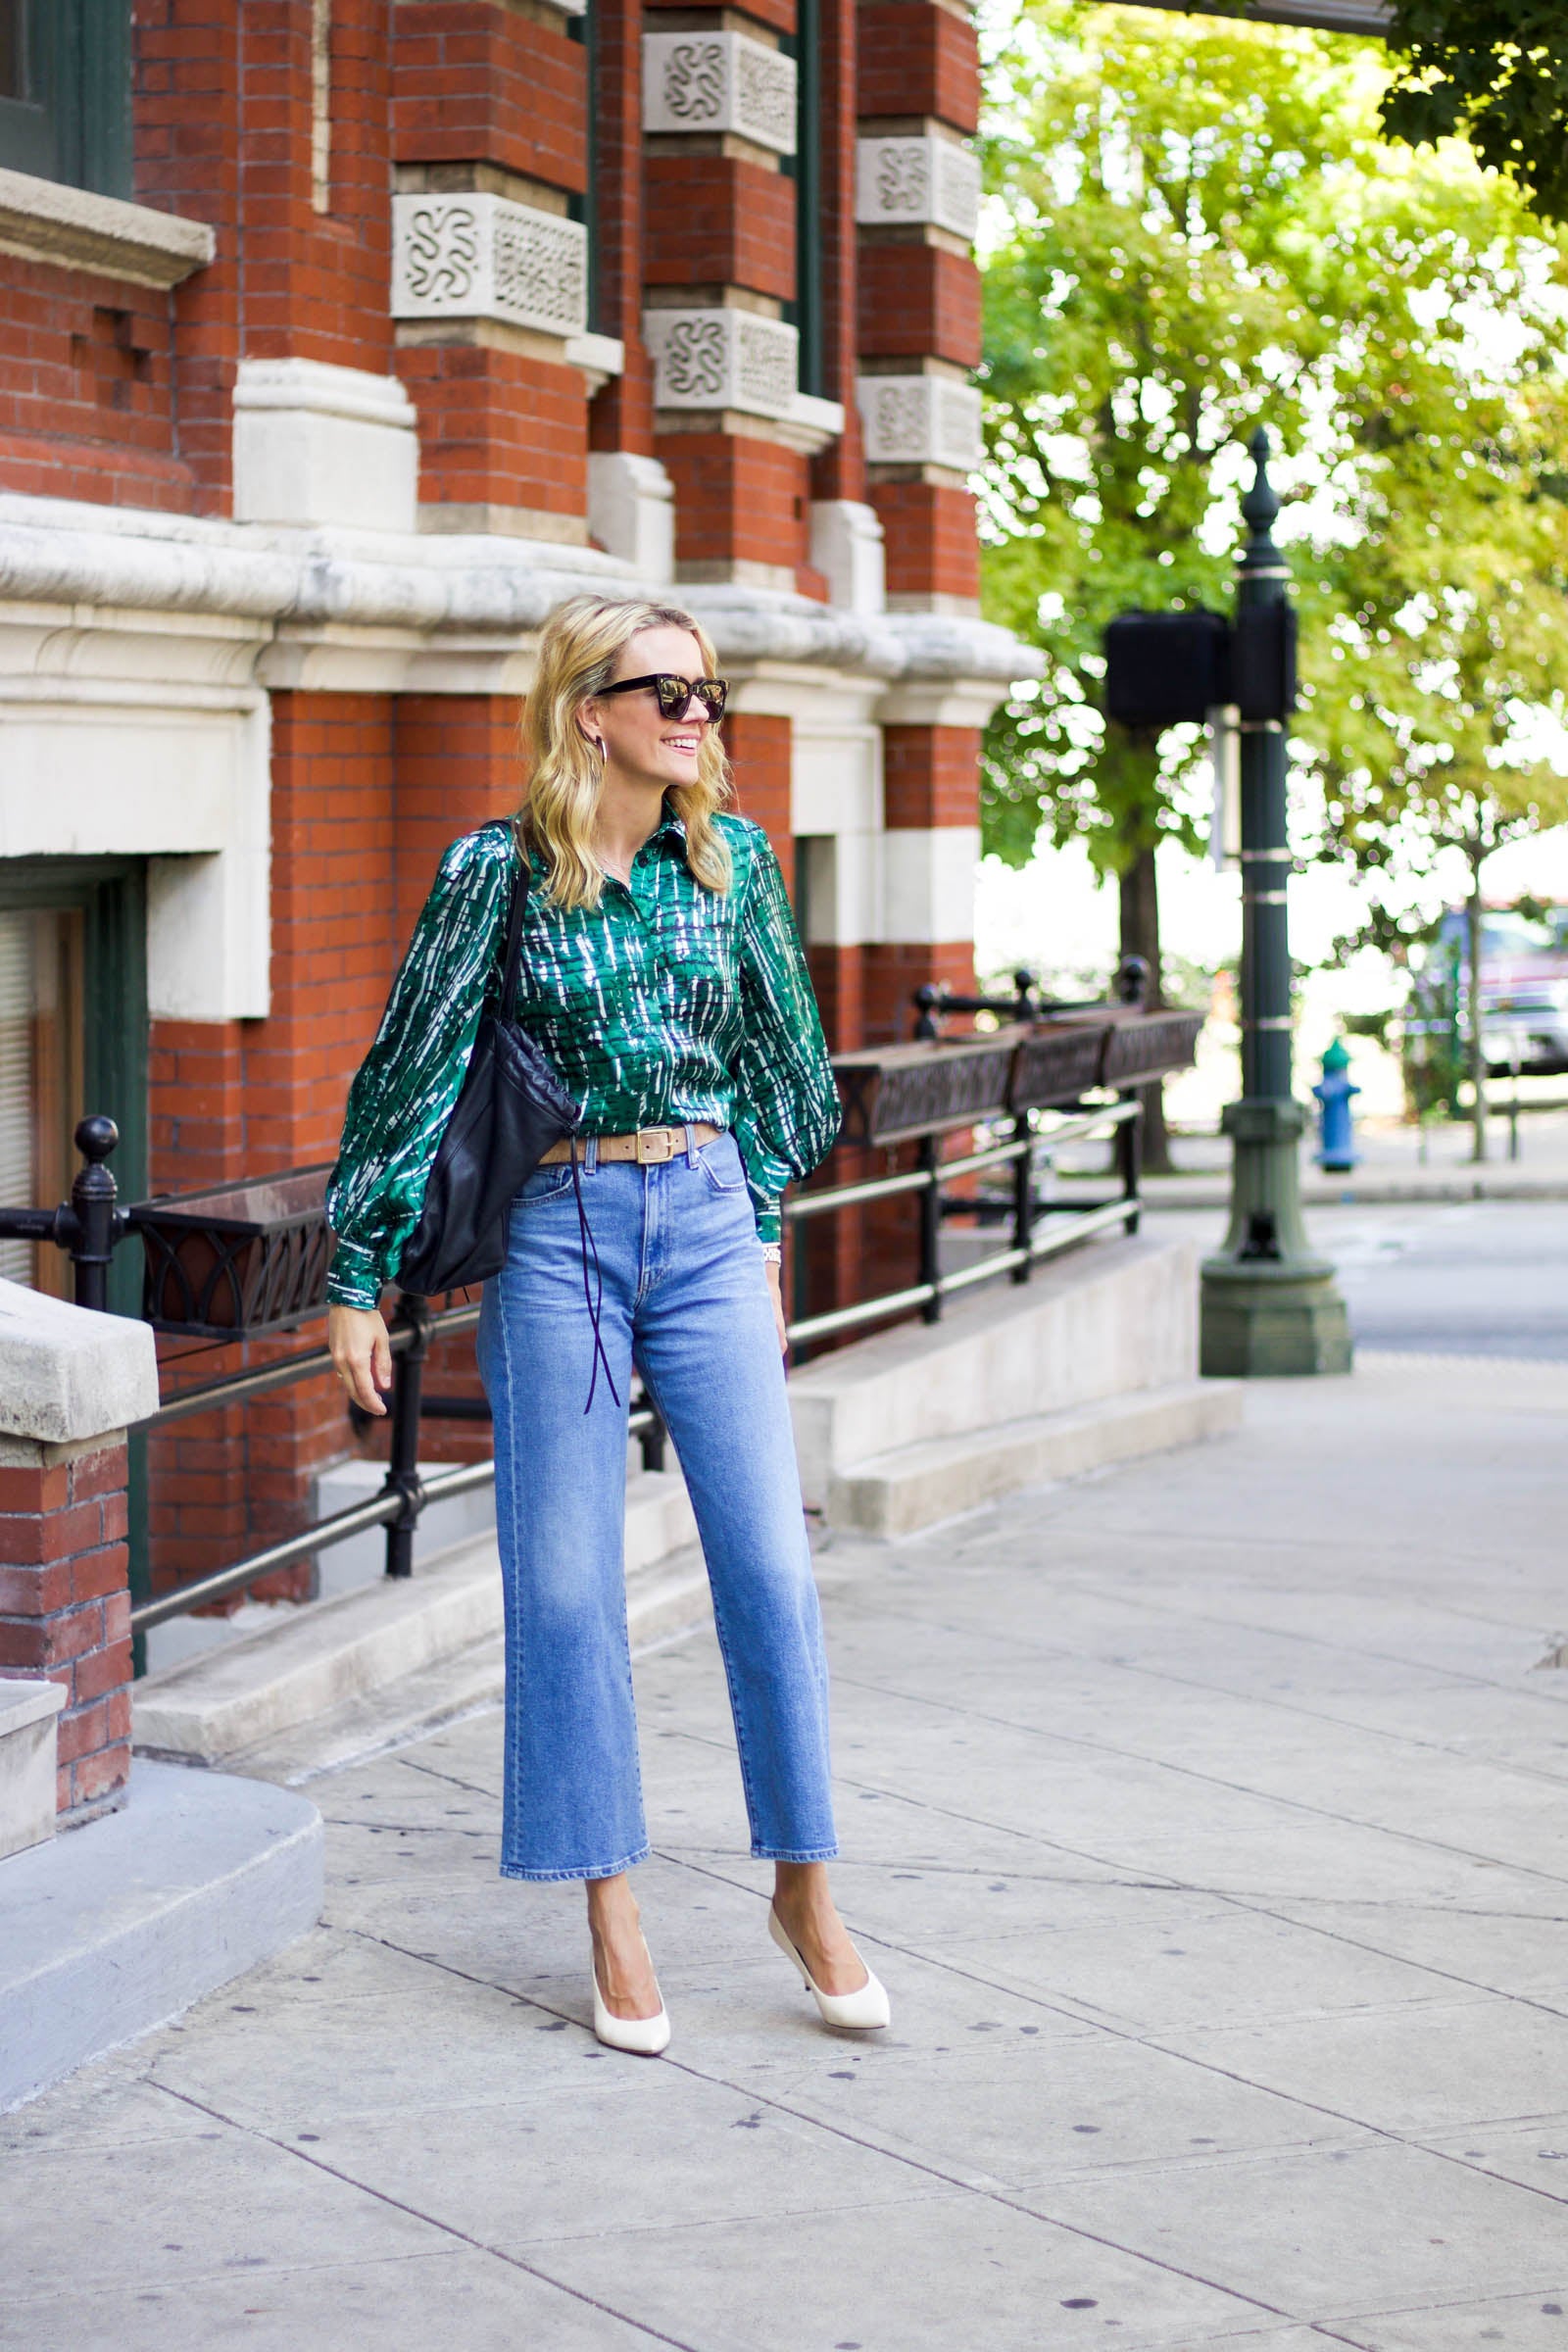 Puff-Sleeves are Here to Stay; Here's How I Style Them – Only on The Avenue